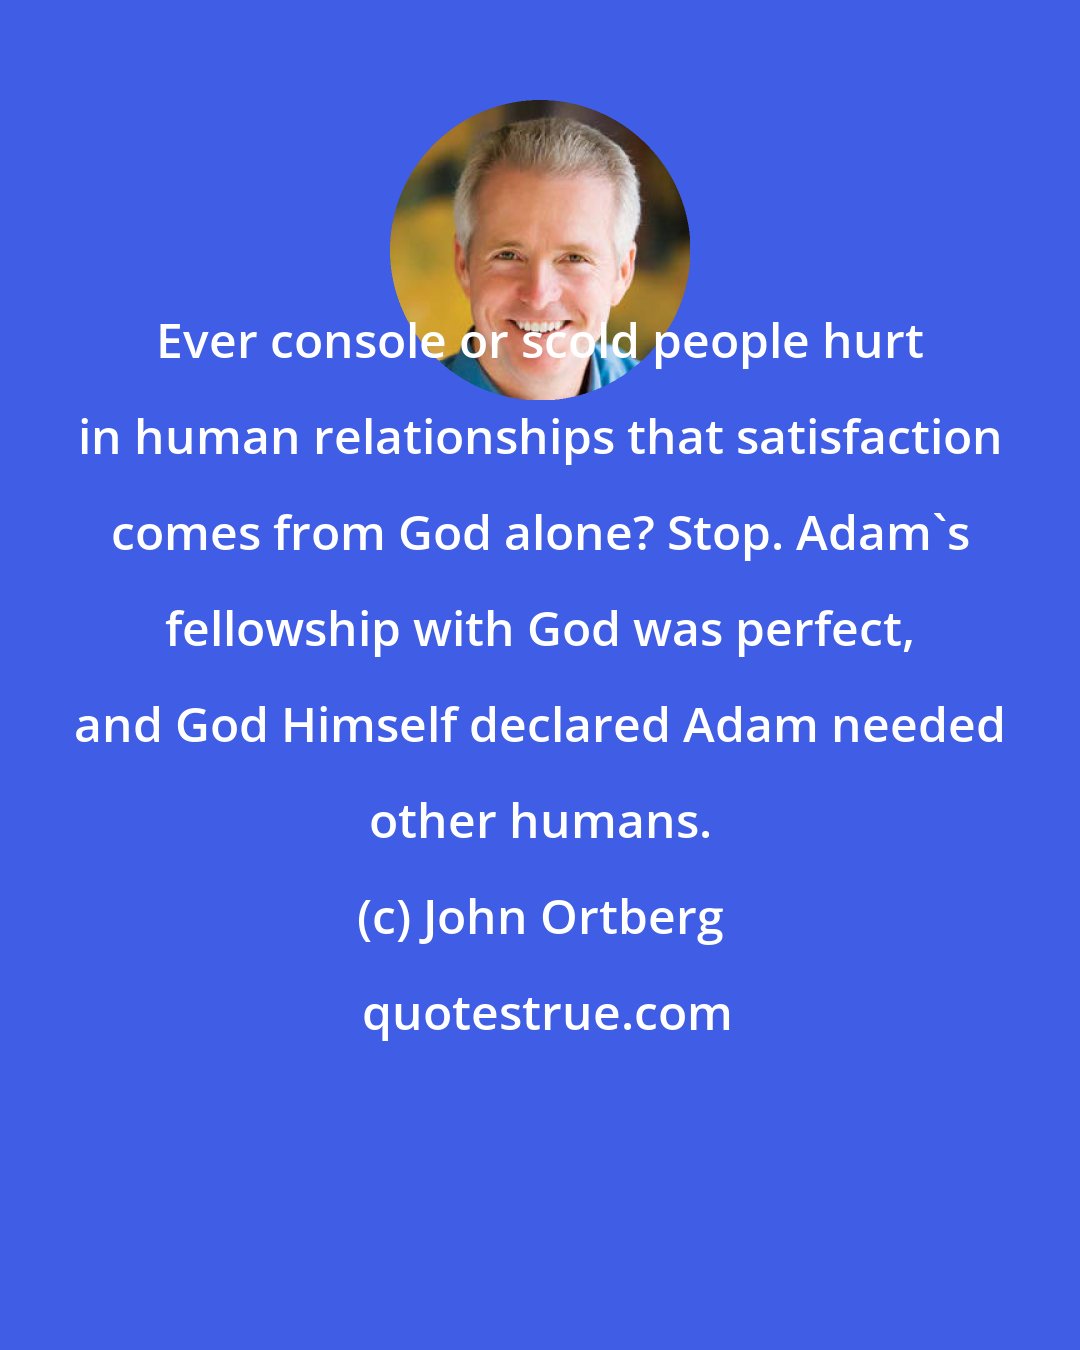 John Ortberg: Ever console or scold people hurt in human relationships that satisfaction comes from God alone? Stop. Adam's fellowship with God was perfect, and God Himself declared Adam needed other humans.